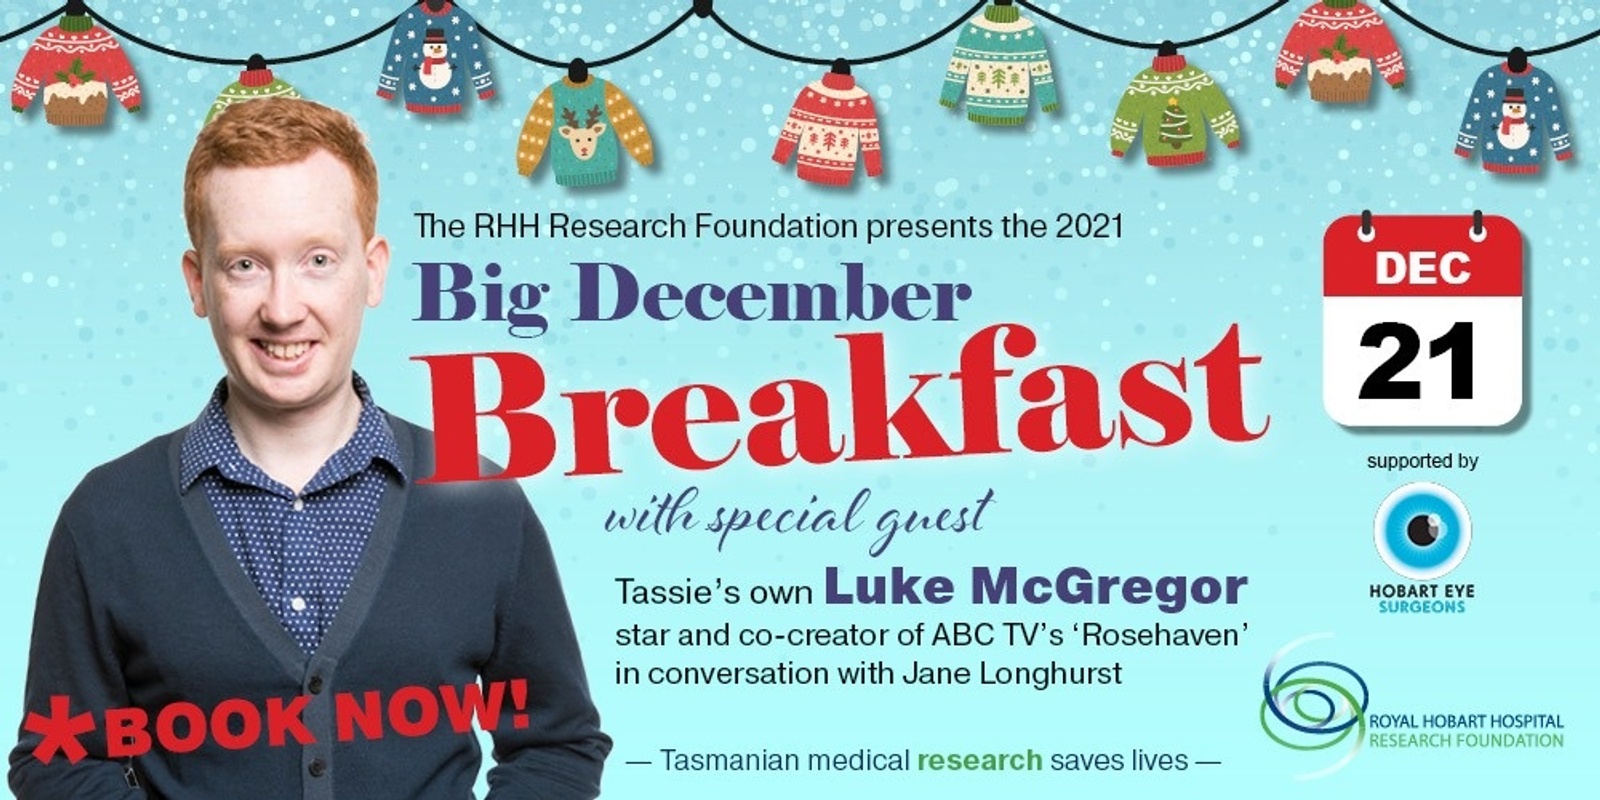 Banner image for 2021 RHH Research Foundation Big December Breakfast